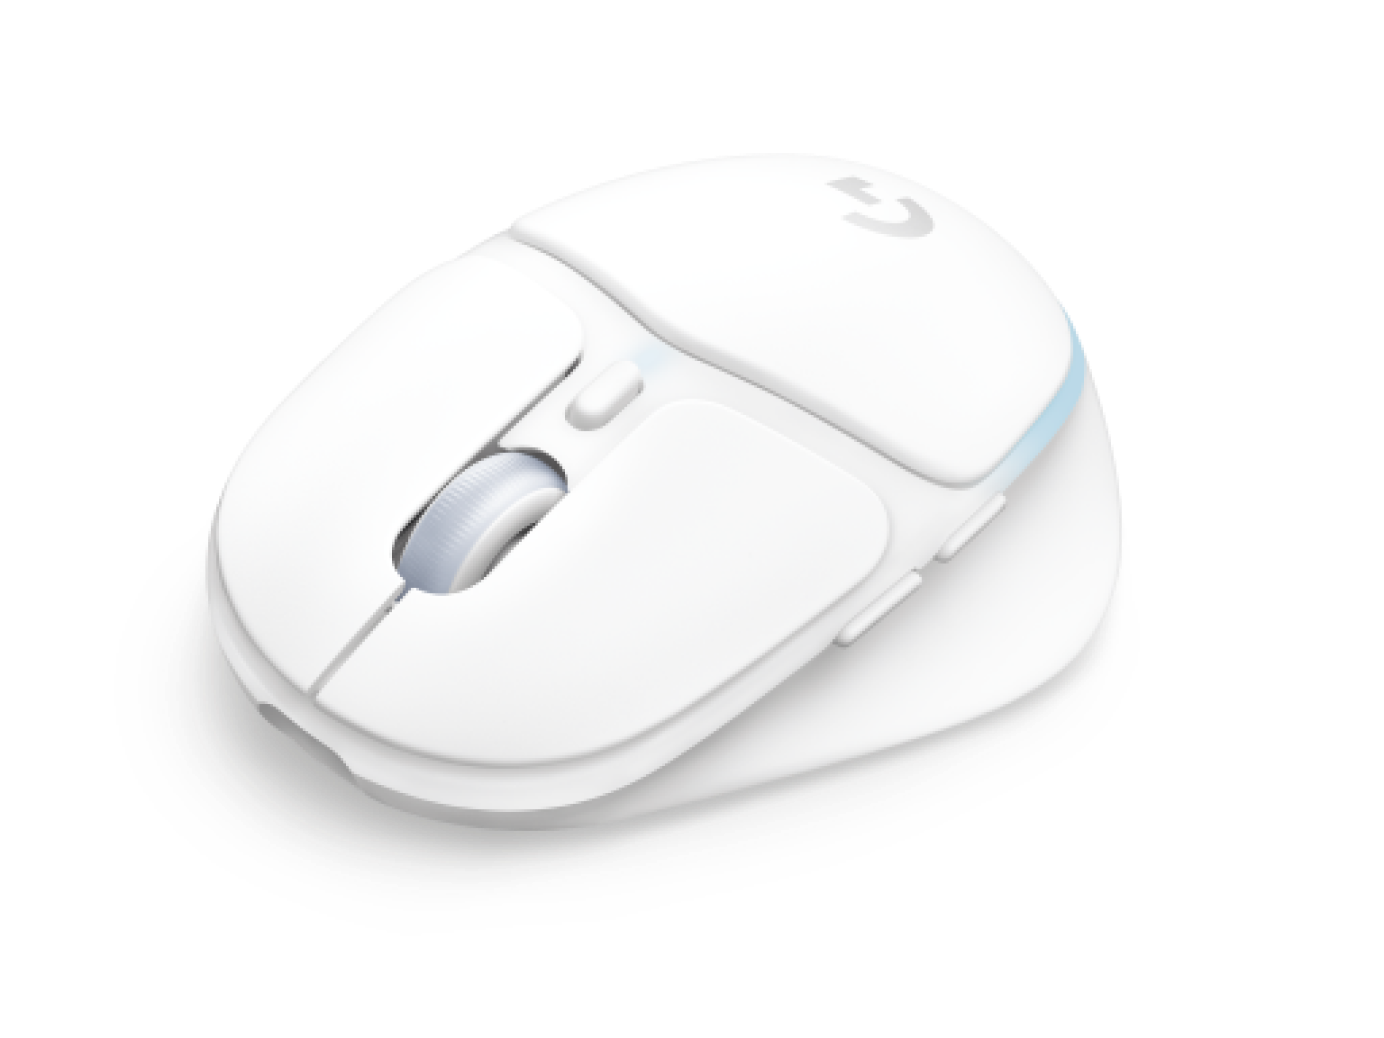 Image of G705 Wireless Gaming Mouse